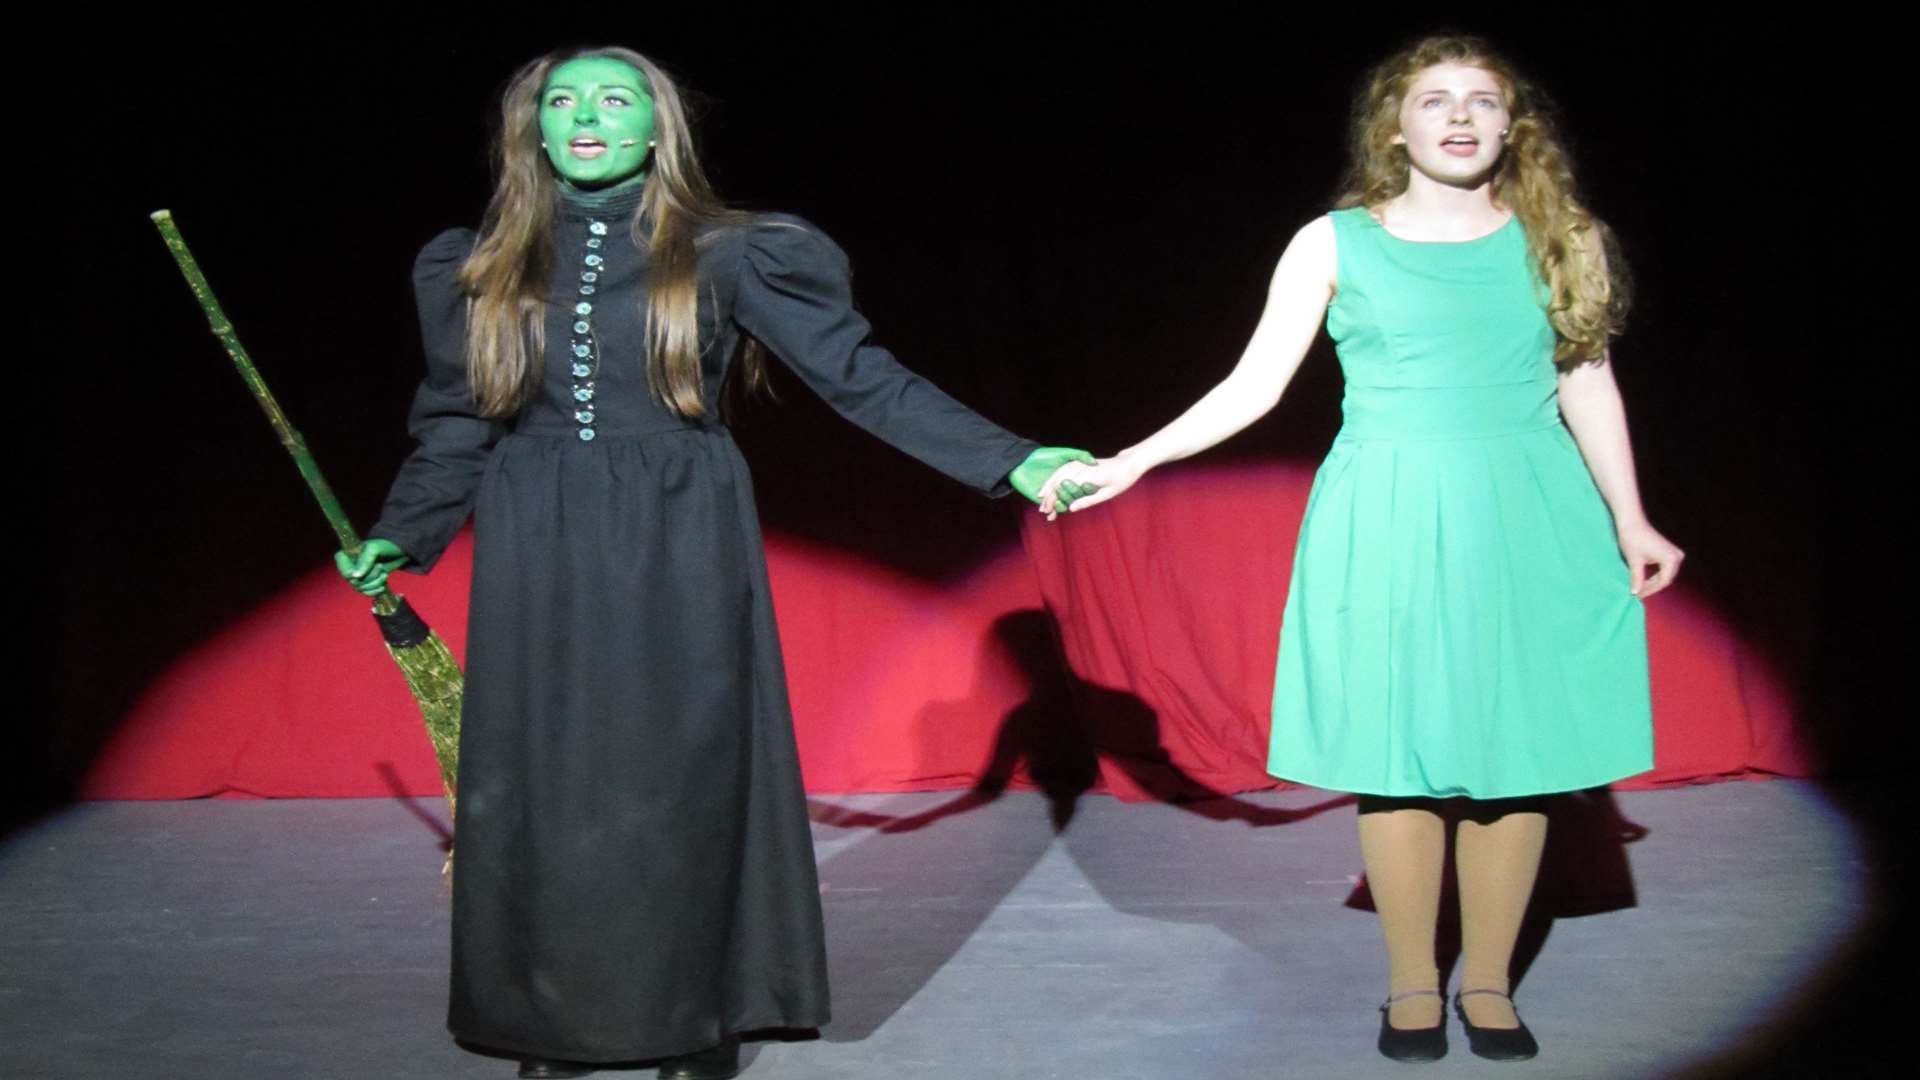 Beth King as Elphaba the Wicked Witch of the West and Josie Davis as Galinda the Good in Wicked